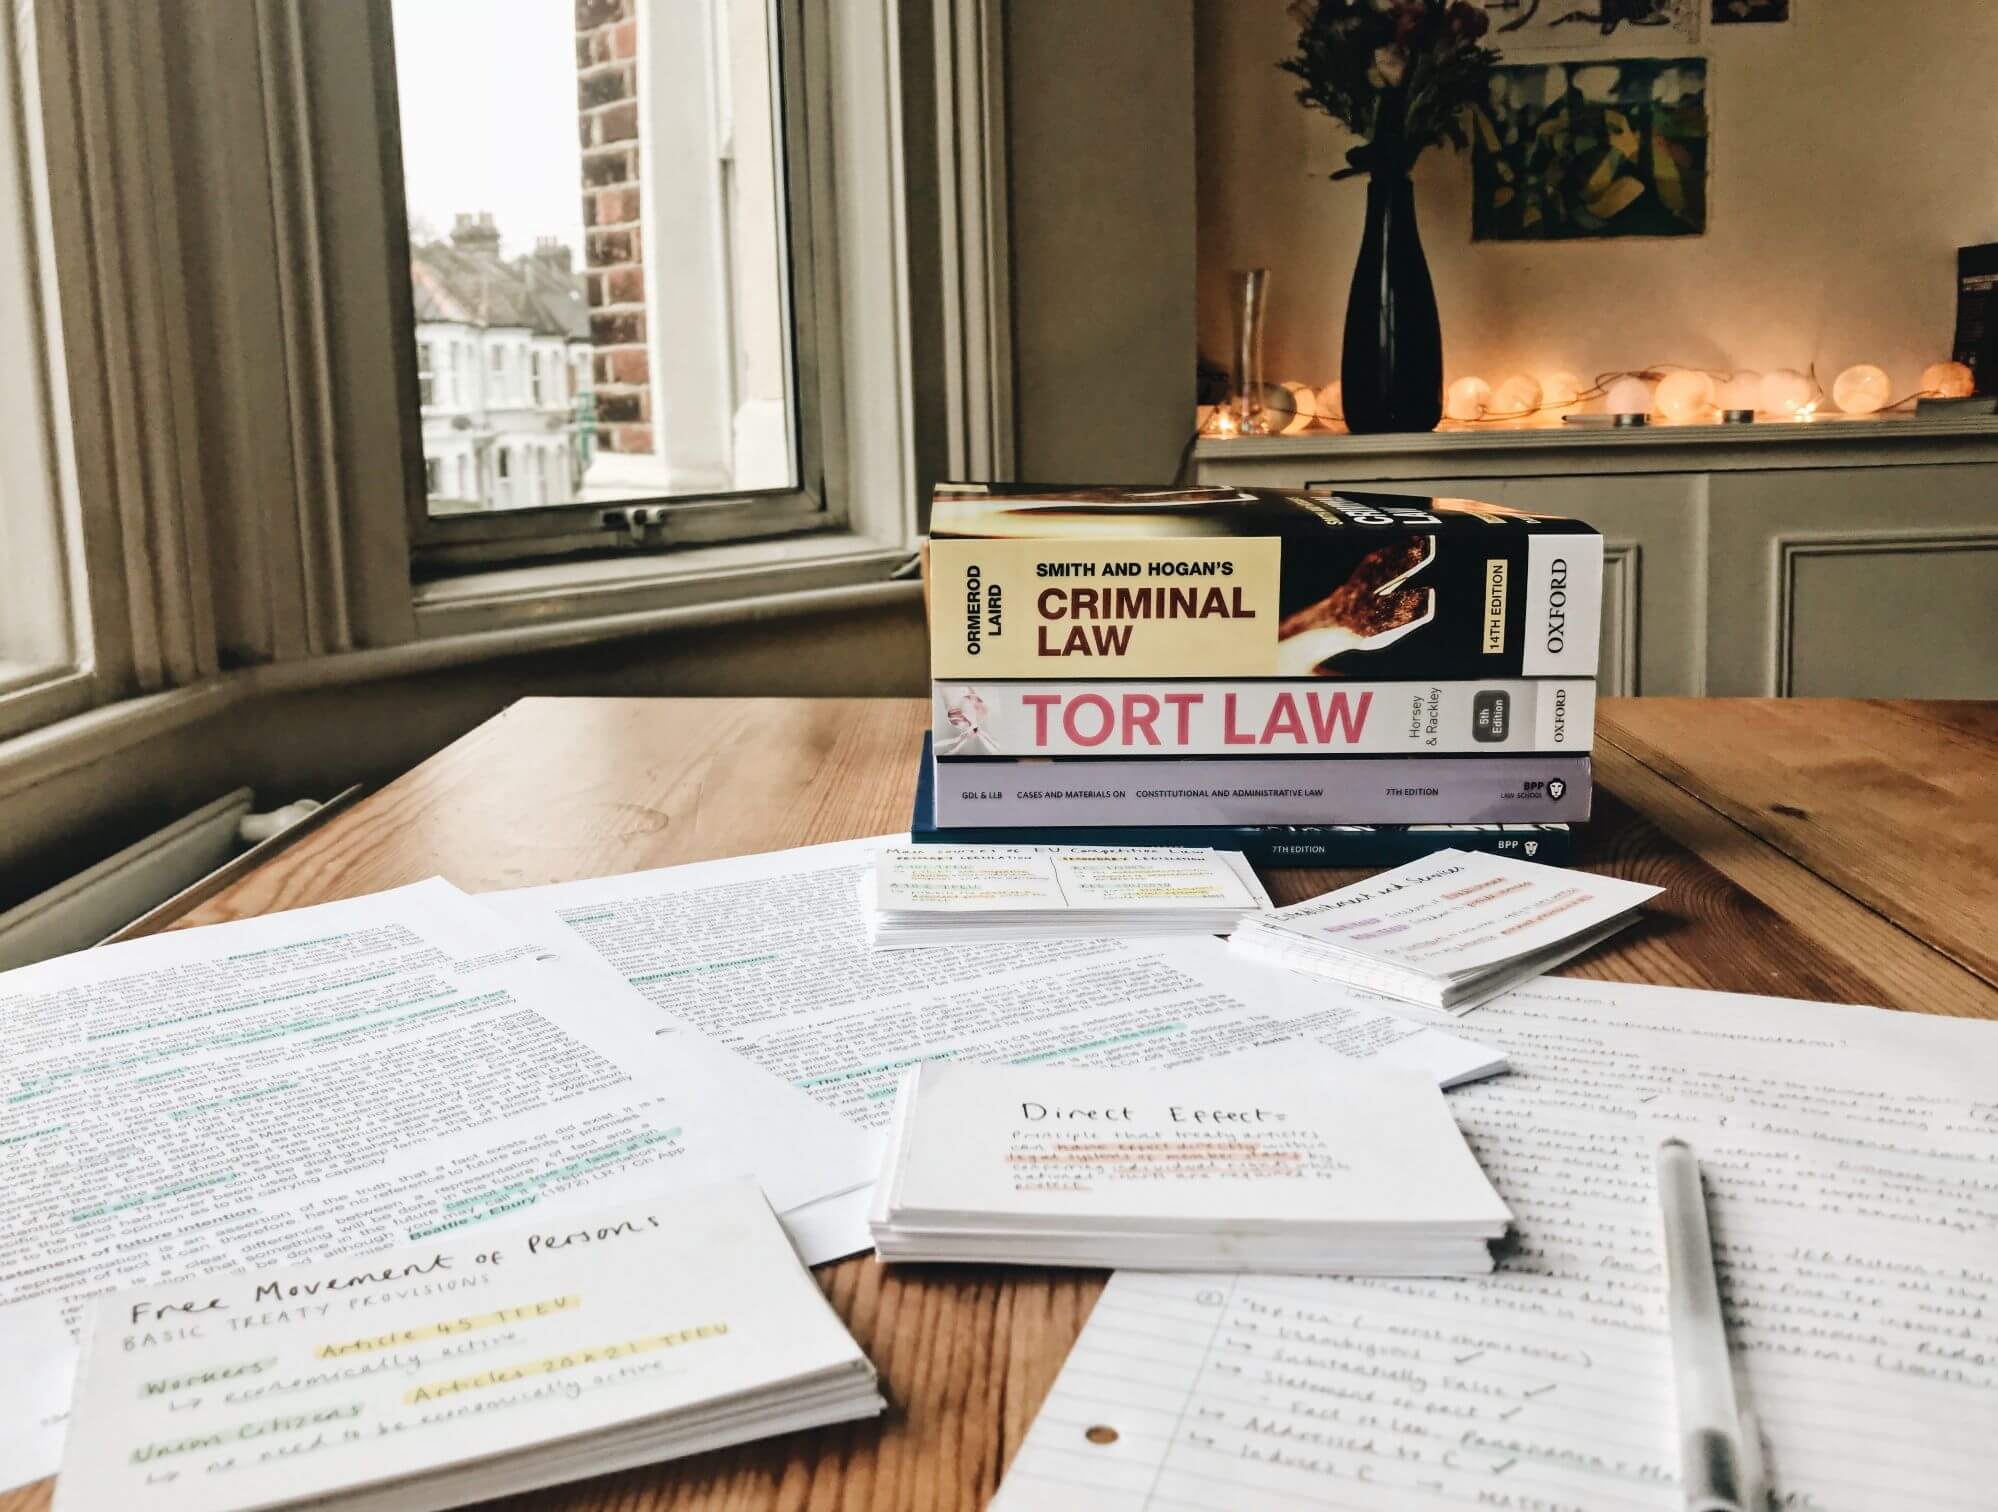 Law student's textbooks for tort law and criminal law on a table.